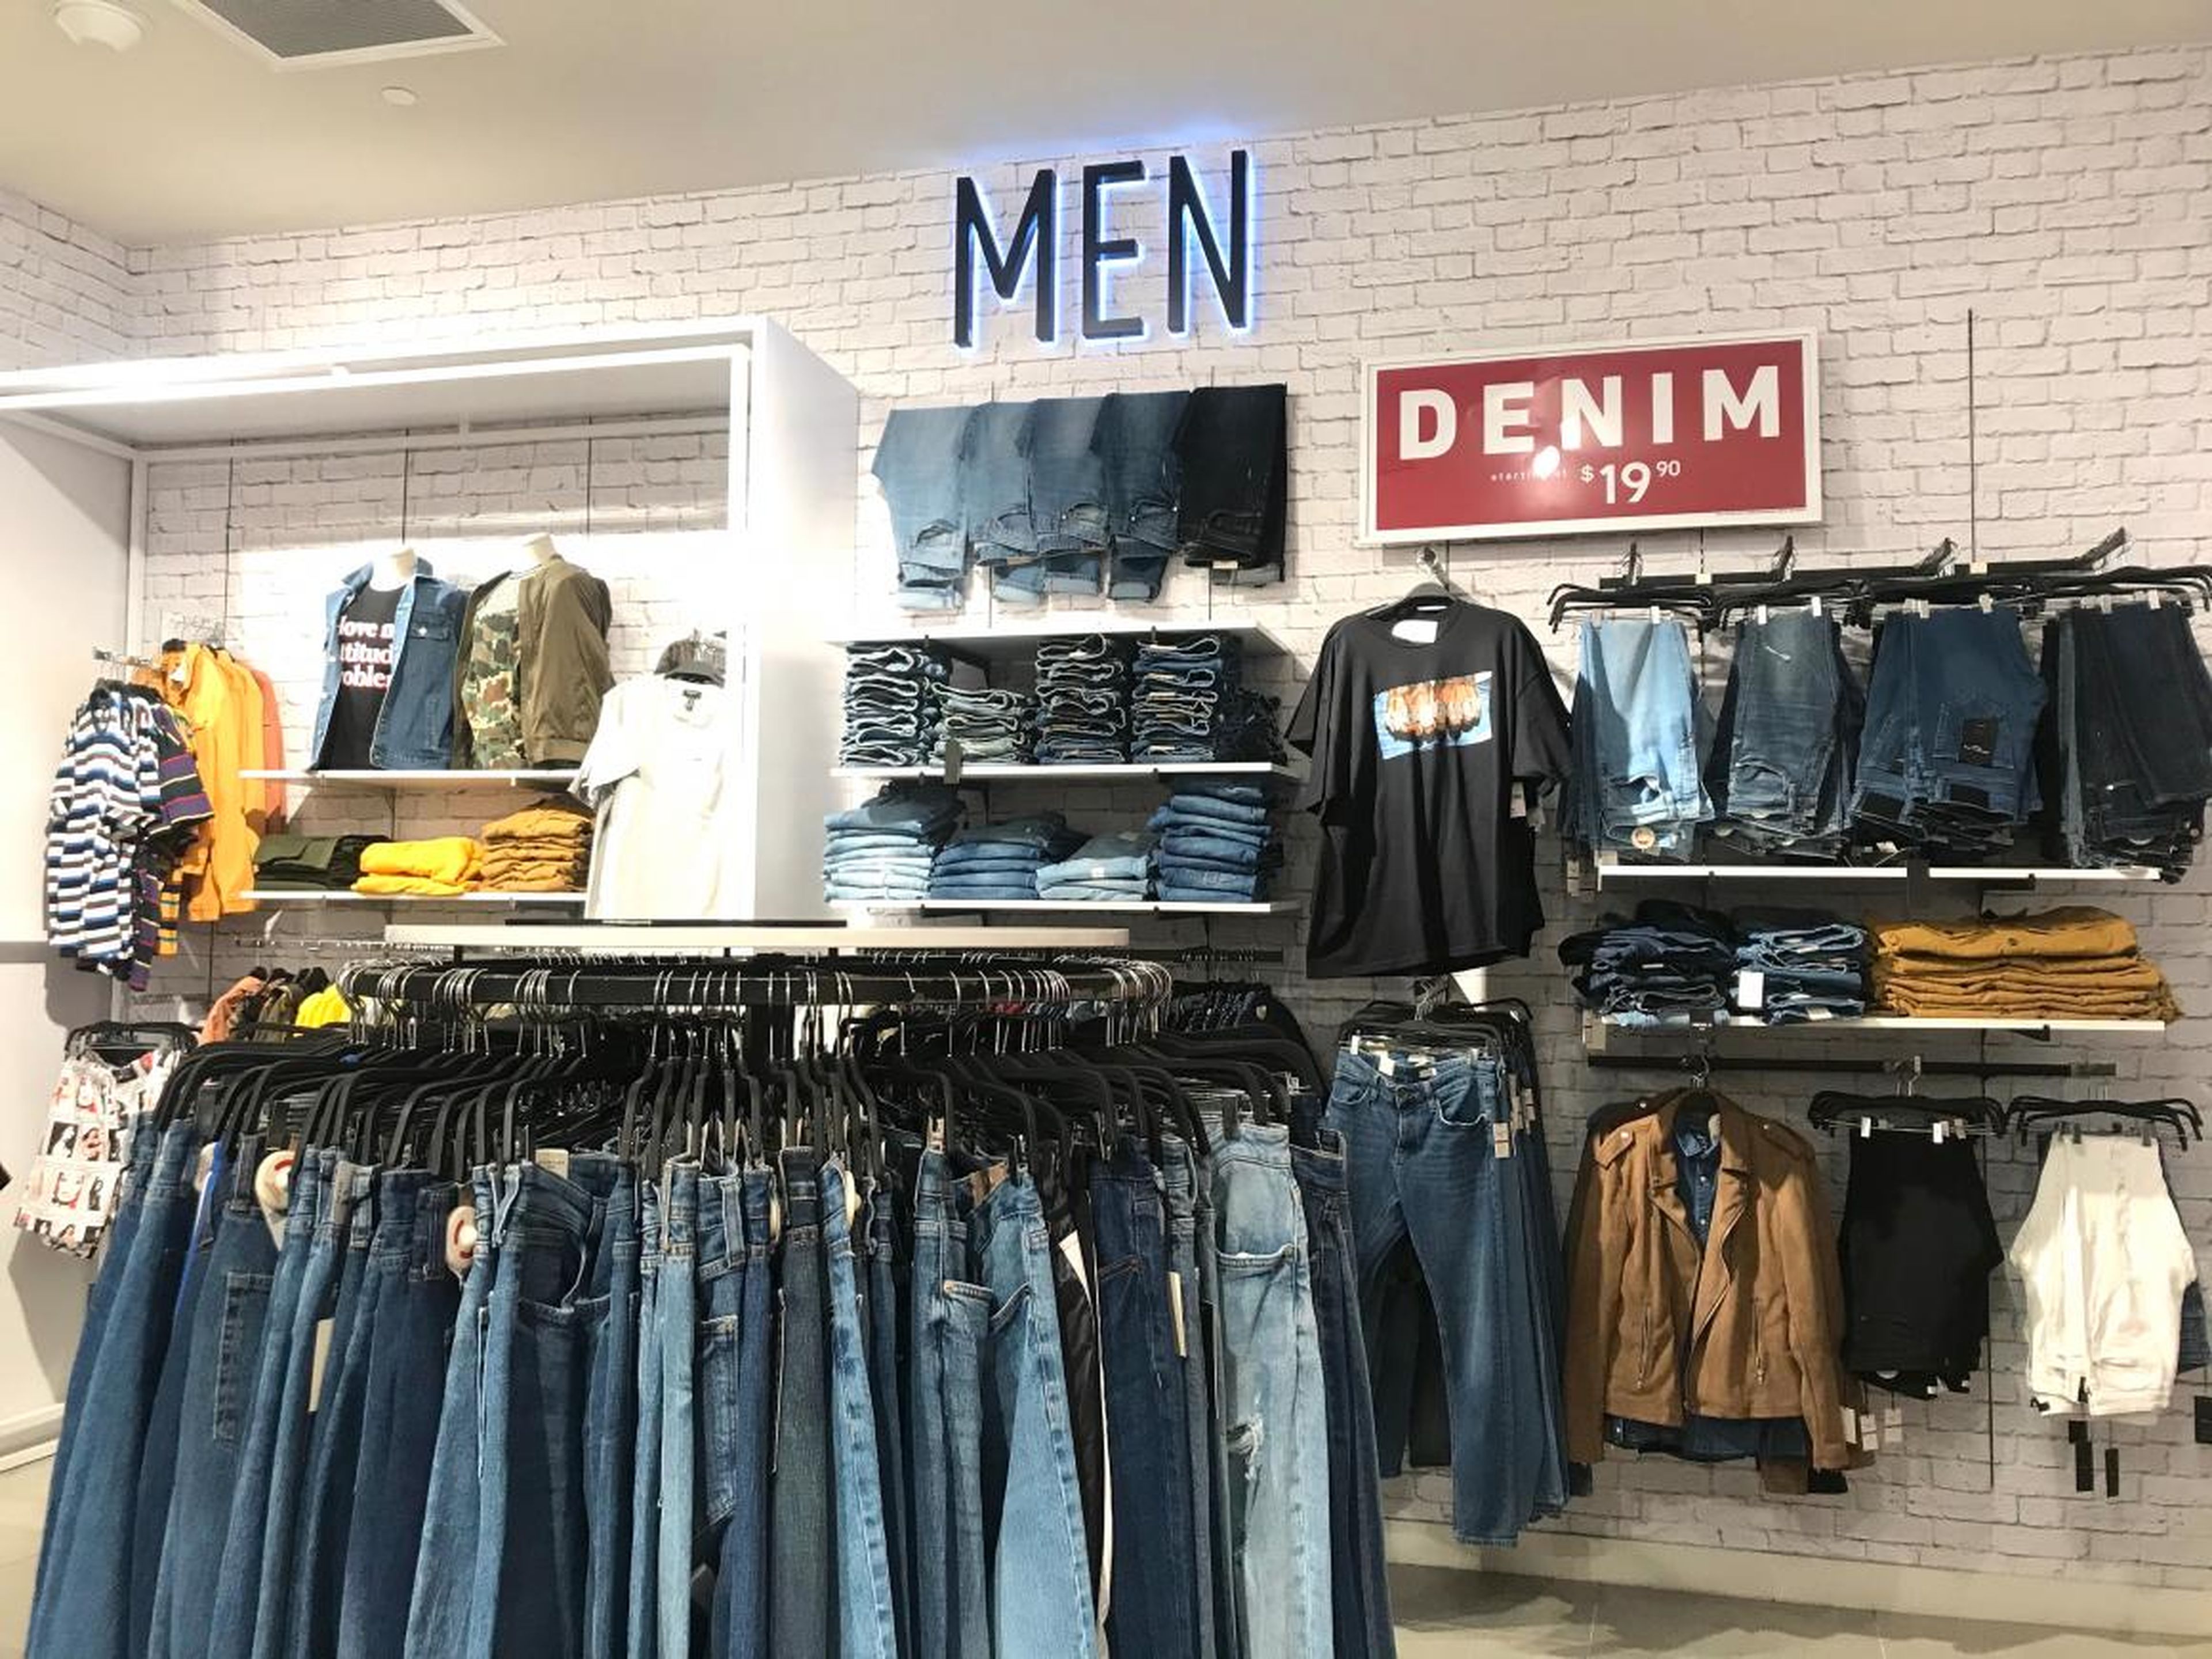 Unlike the bustling H&M men's section, the Forever 21 men's department remained largely untouched.